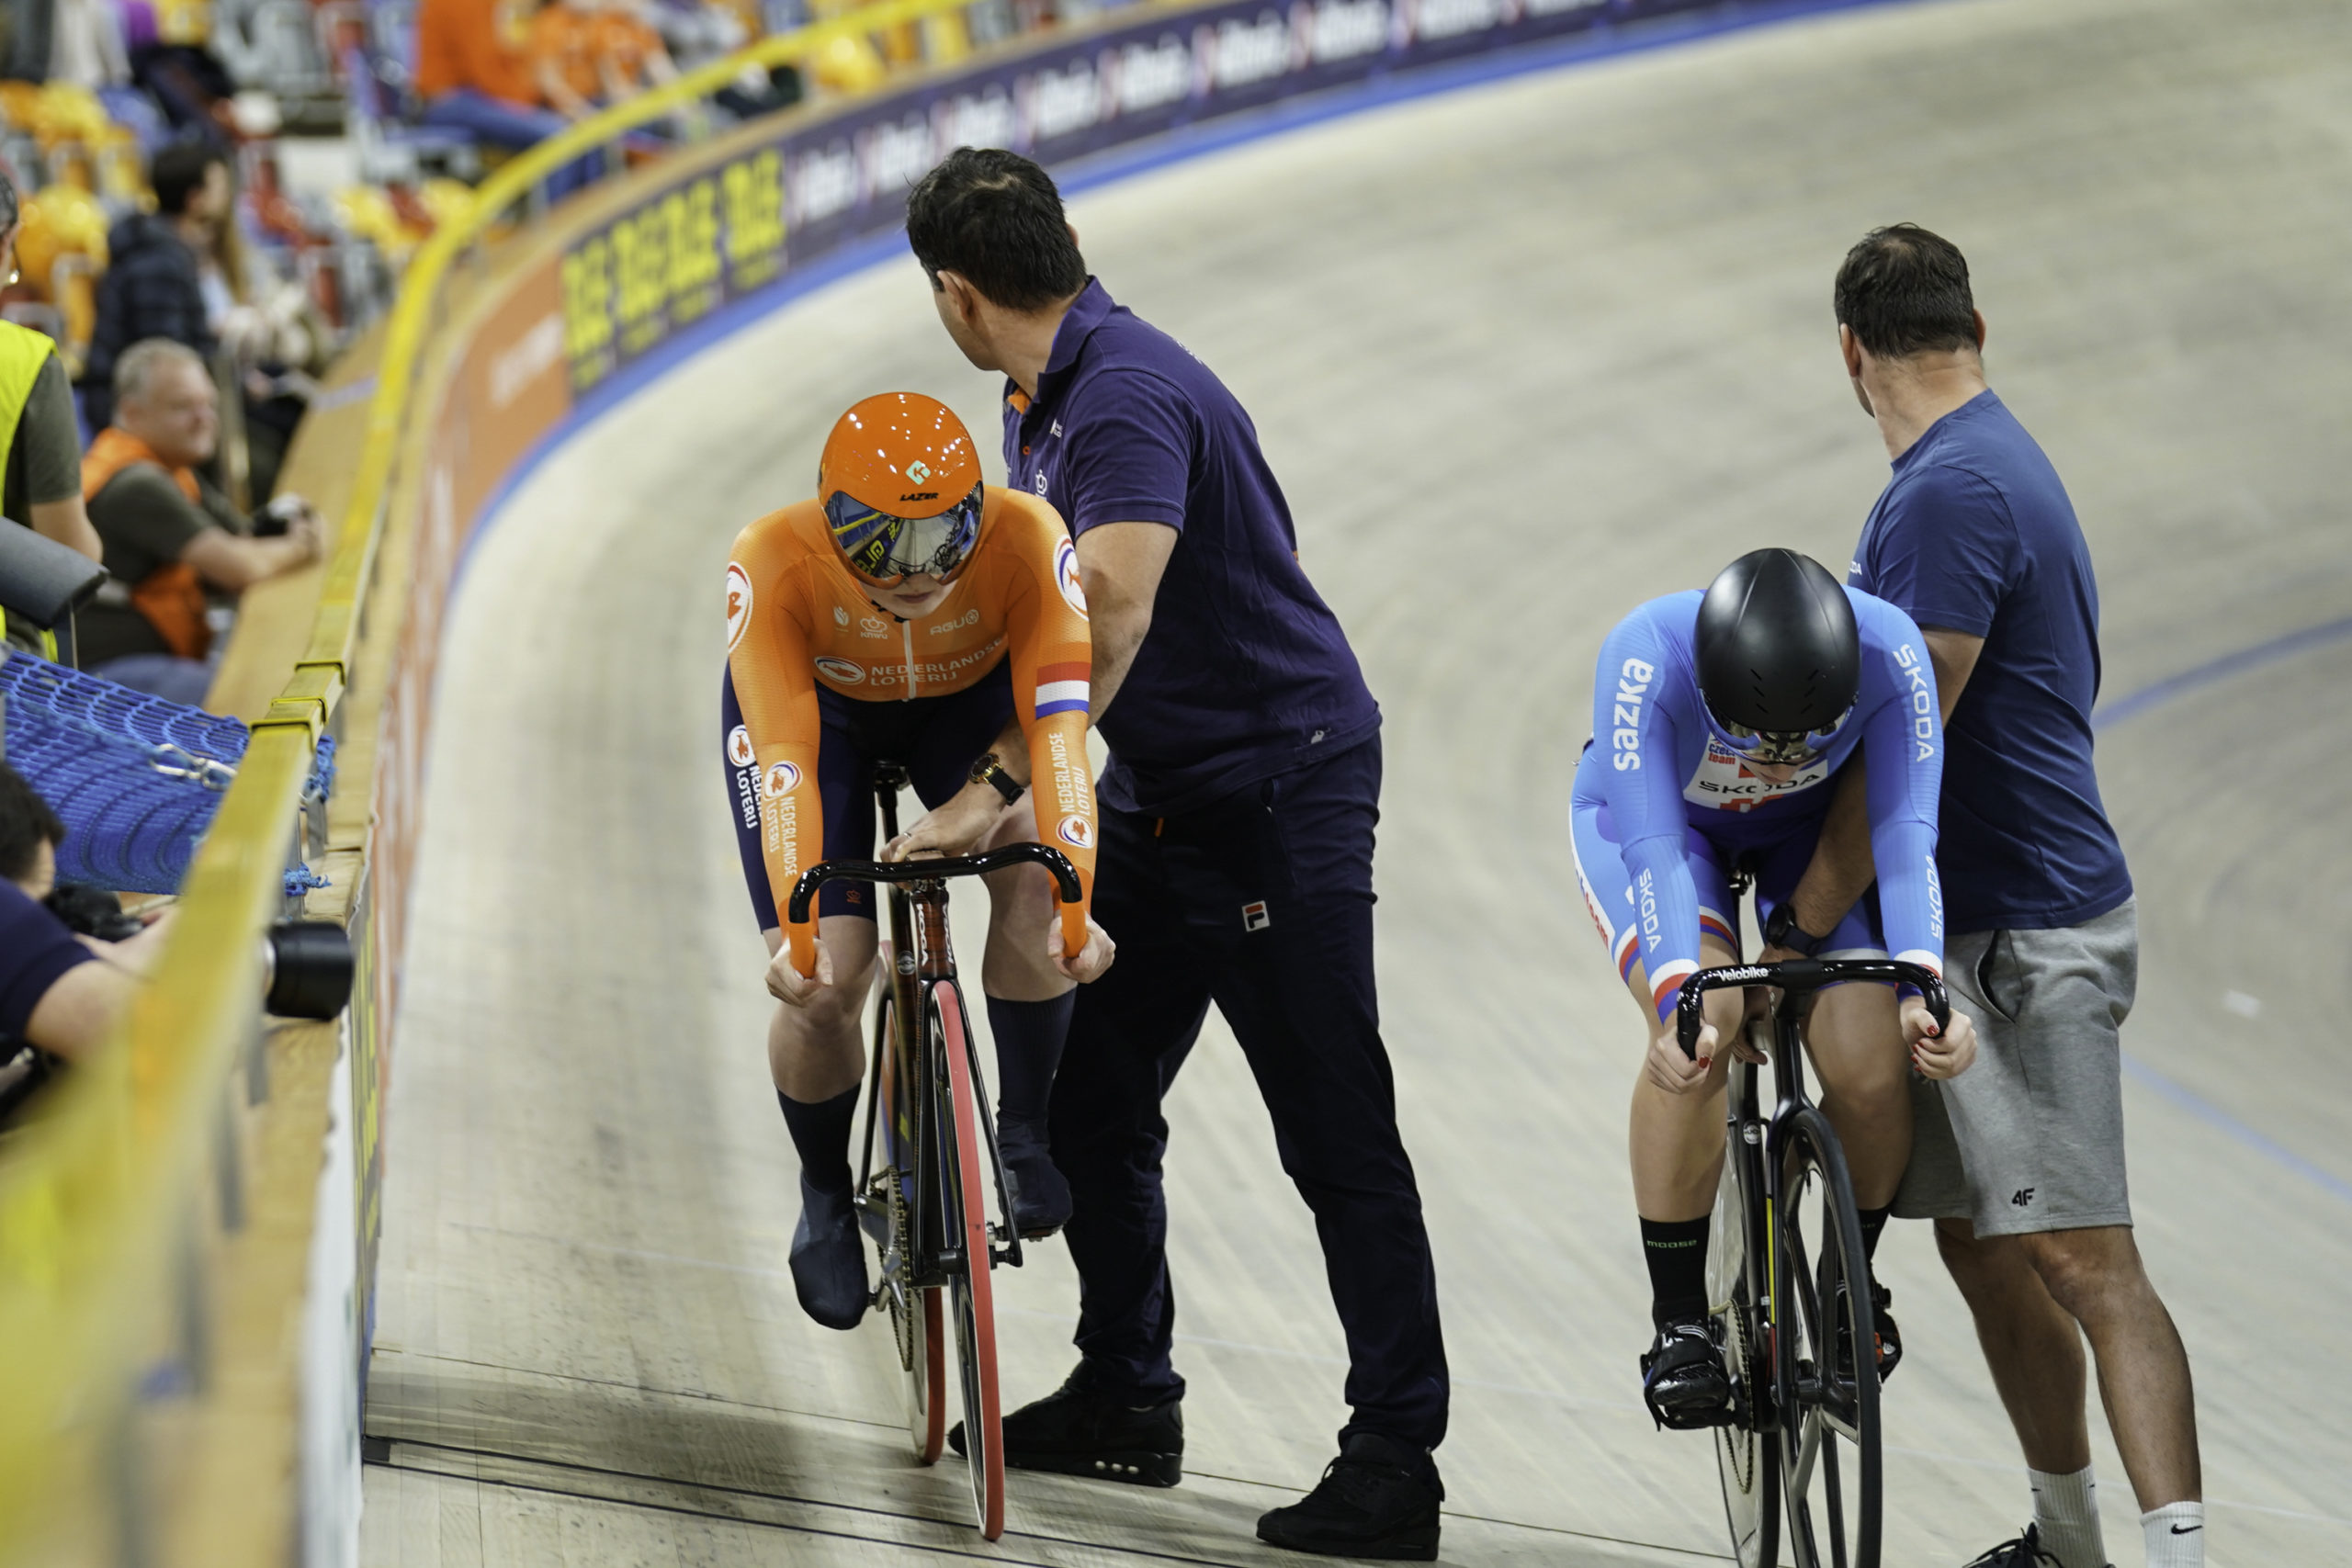 Biology student wins bronze medal in Euro-Championships track cycling